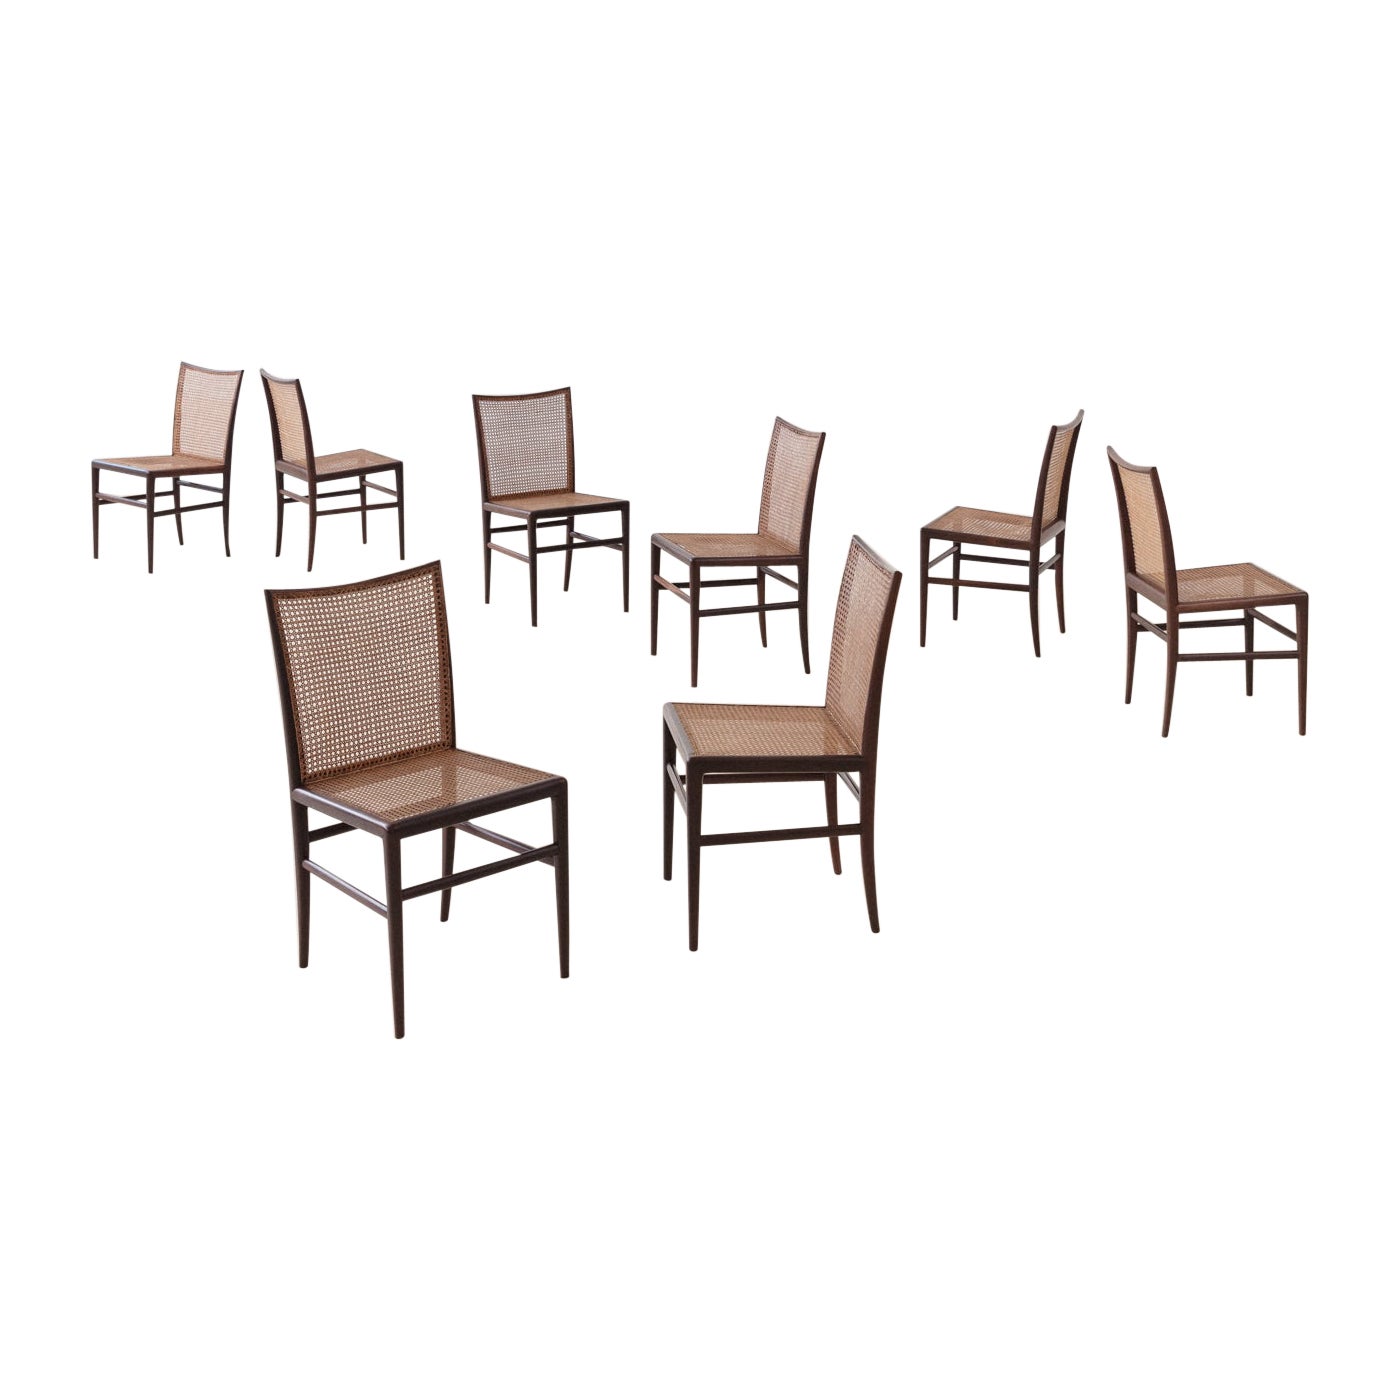 Set of 8 Rosewood Cane Chairs, Branco & Preto, 1952, Brazilian Midcentury For Sale